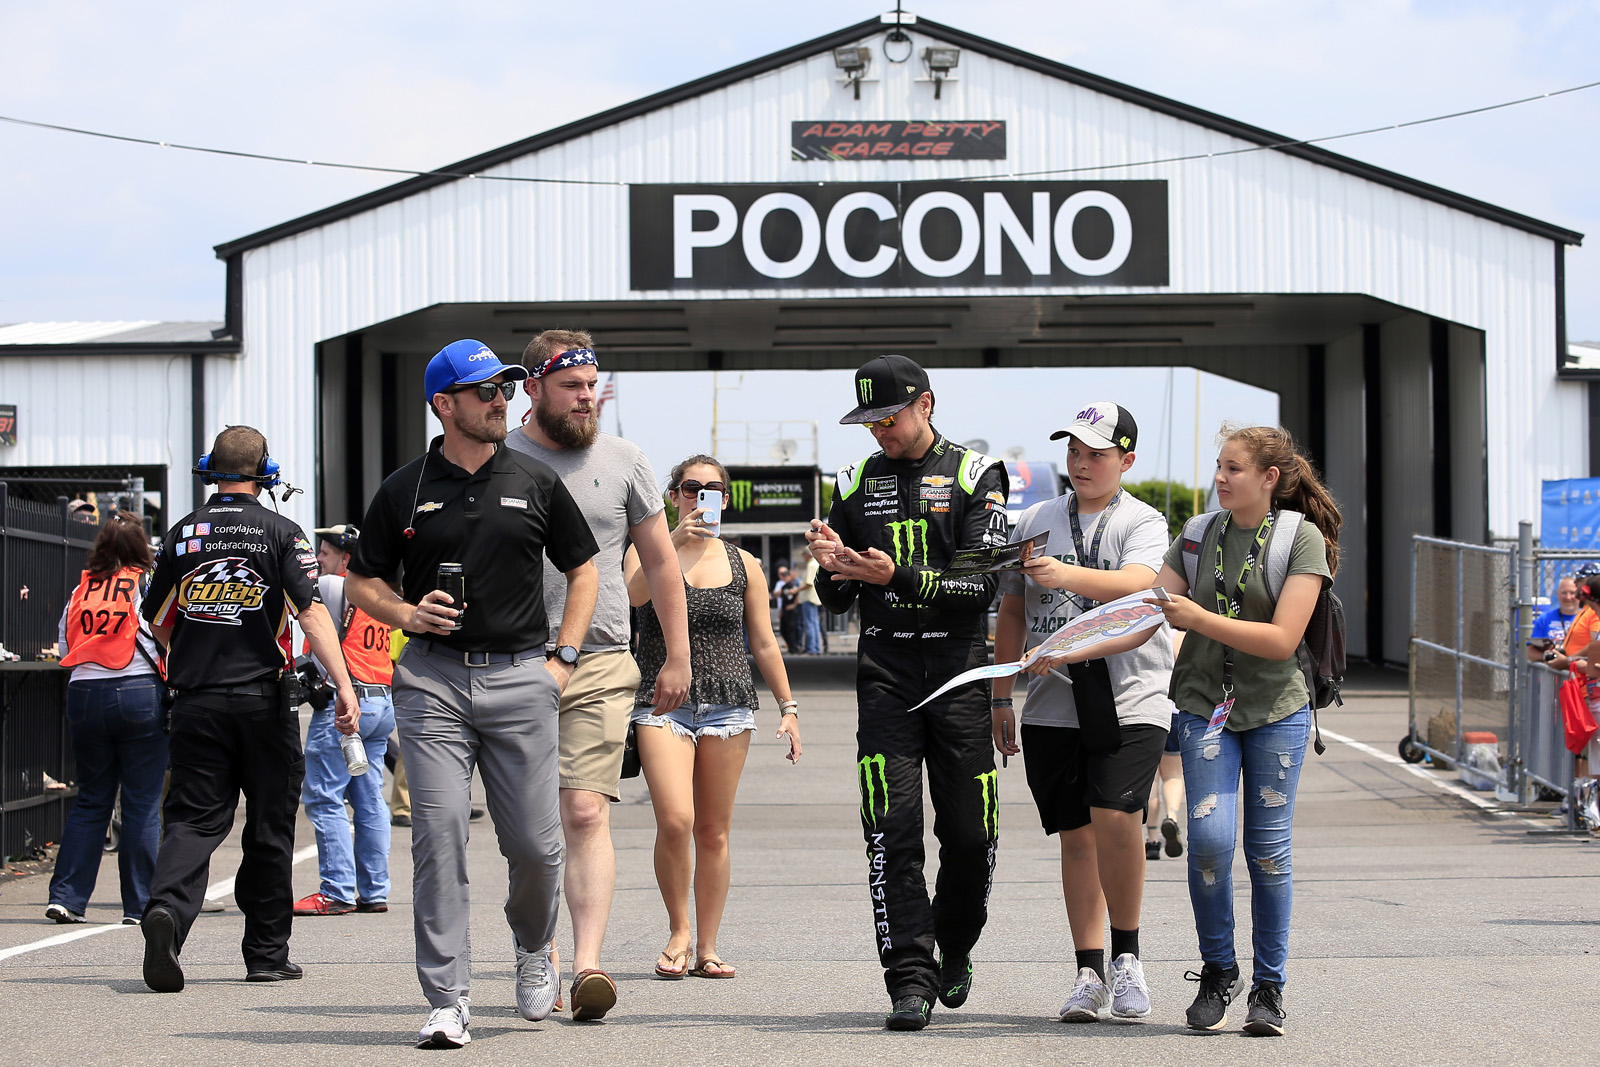 Monster Energy NASCAR Cup Series Race Pocono 400 – Qualifying